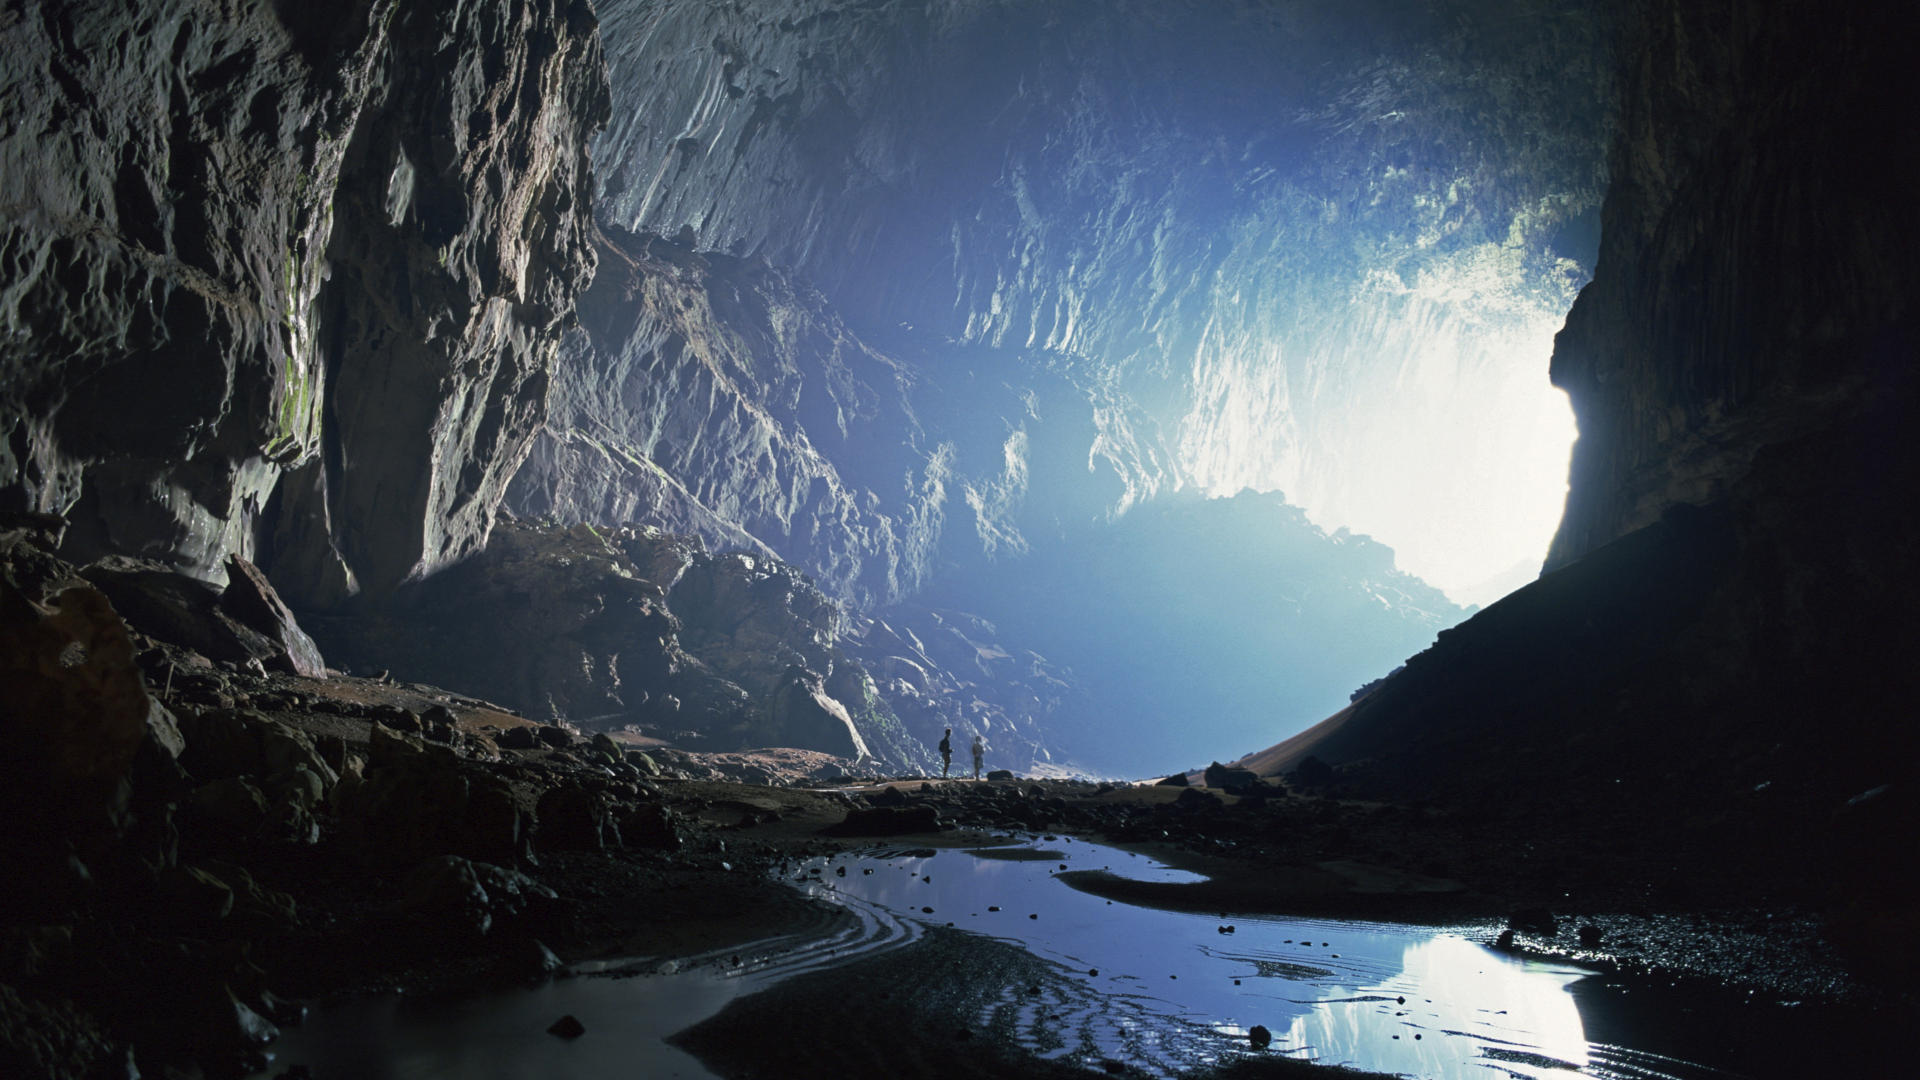 Cave Desktop Wallpaper For HD Widescreen And Mobile